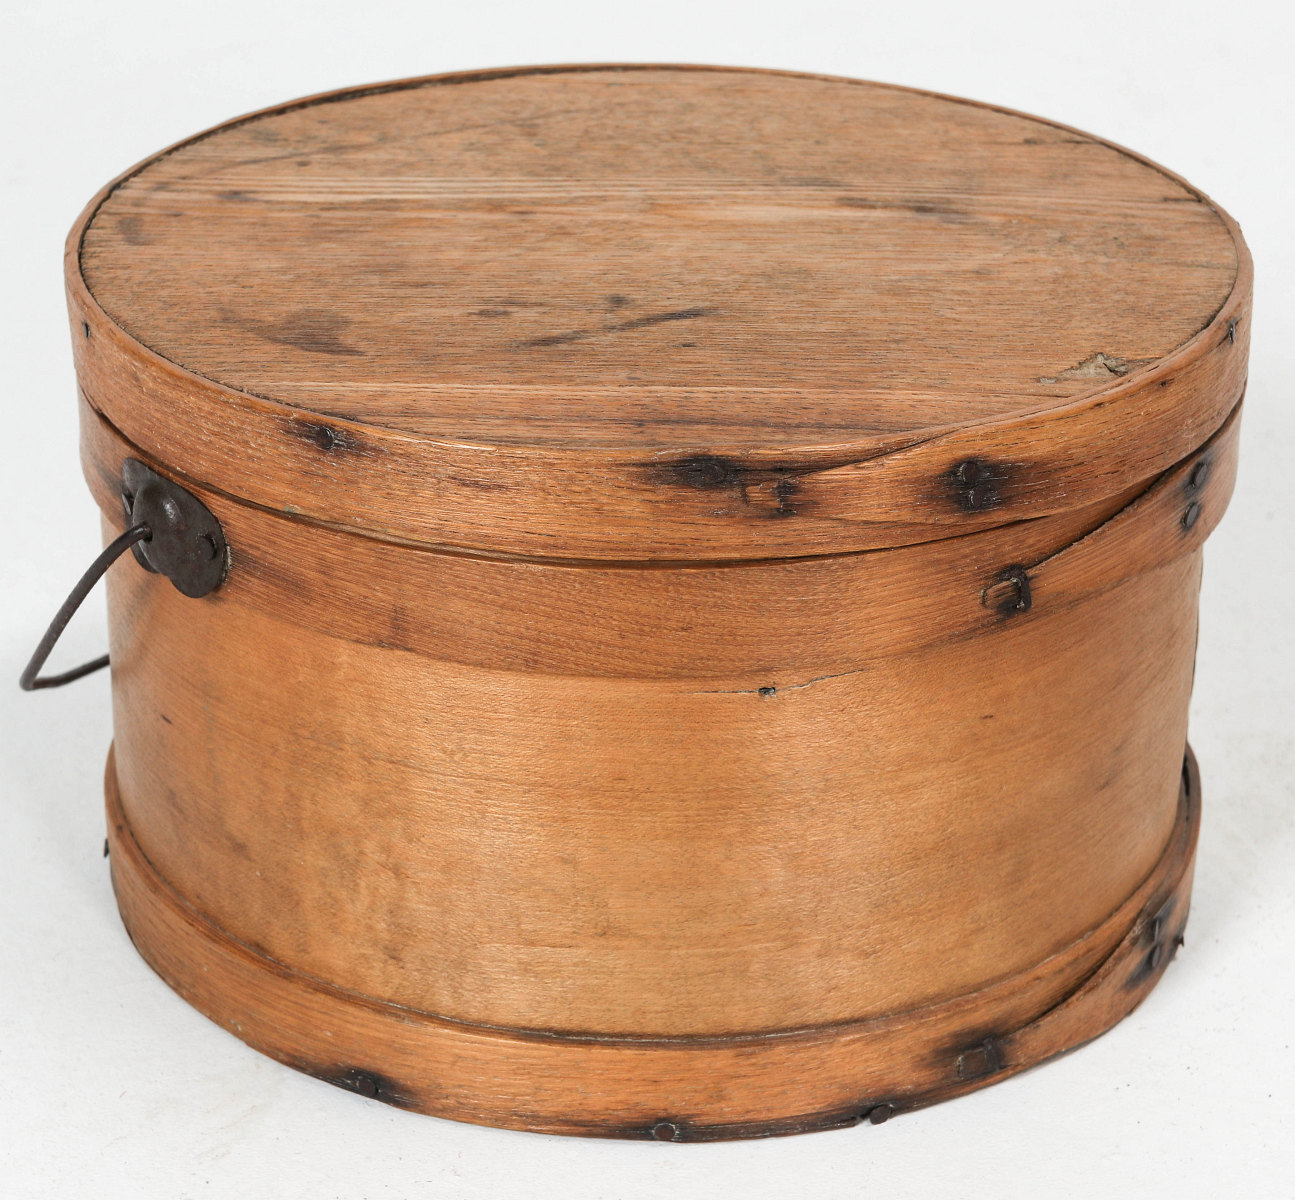 A CIRCA 1900 BENTWOOD PANTRY BOX WITH BAIL HANDLE